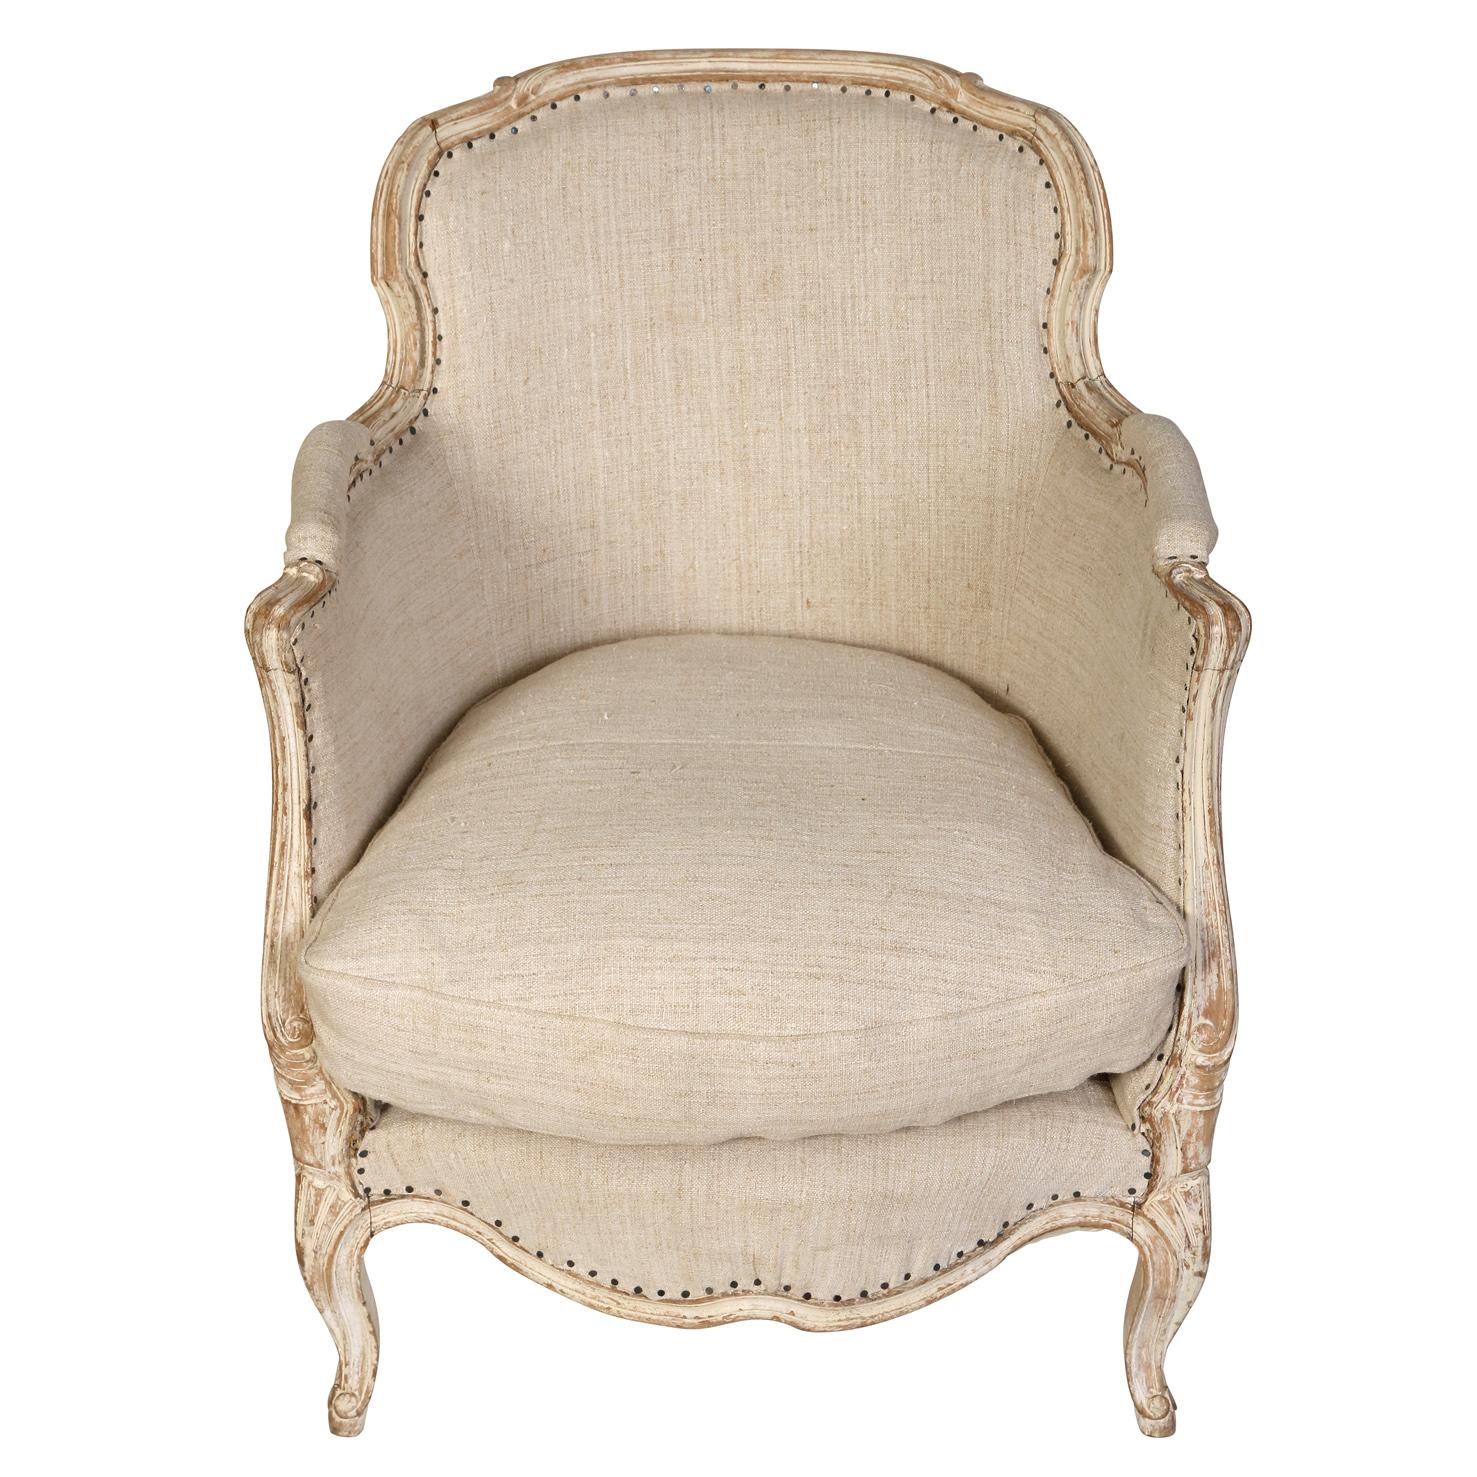 We love the scale of this pair of Louis XV style bergêres.  This duo has a grayish white finish upholstered in a natural linen with a tight back and loose seat cushion.  The lovely carving and cabriole legs are characteristic of the Lous XV style,